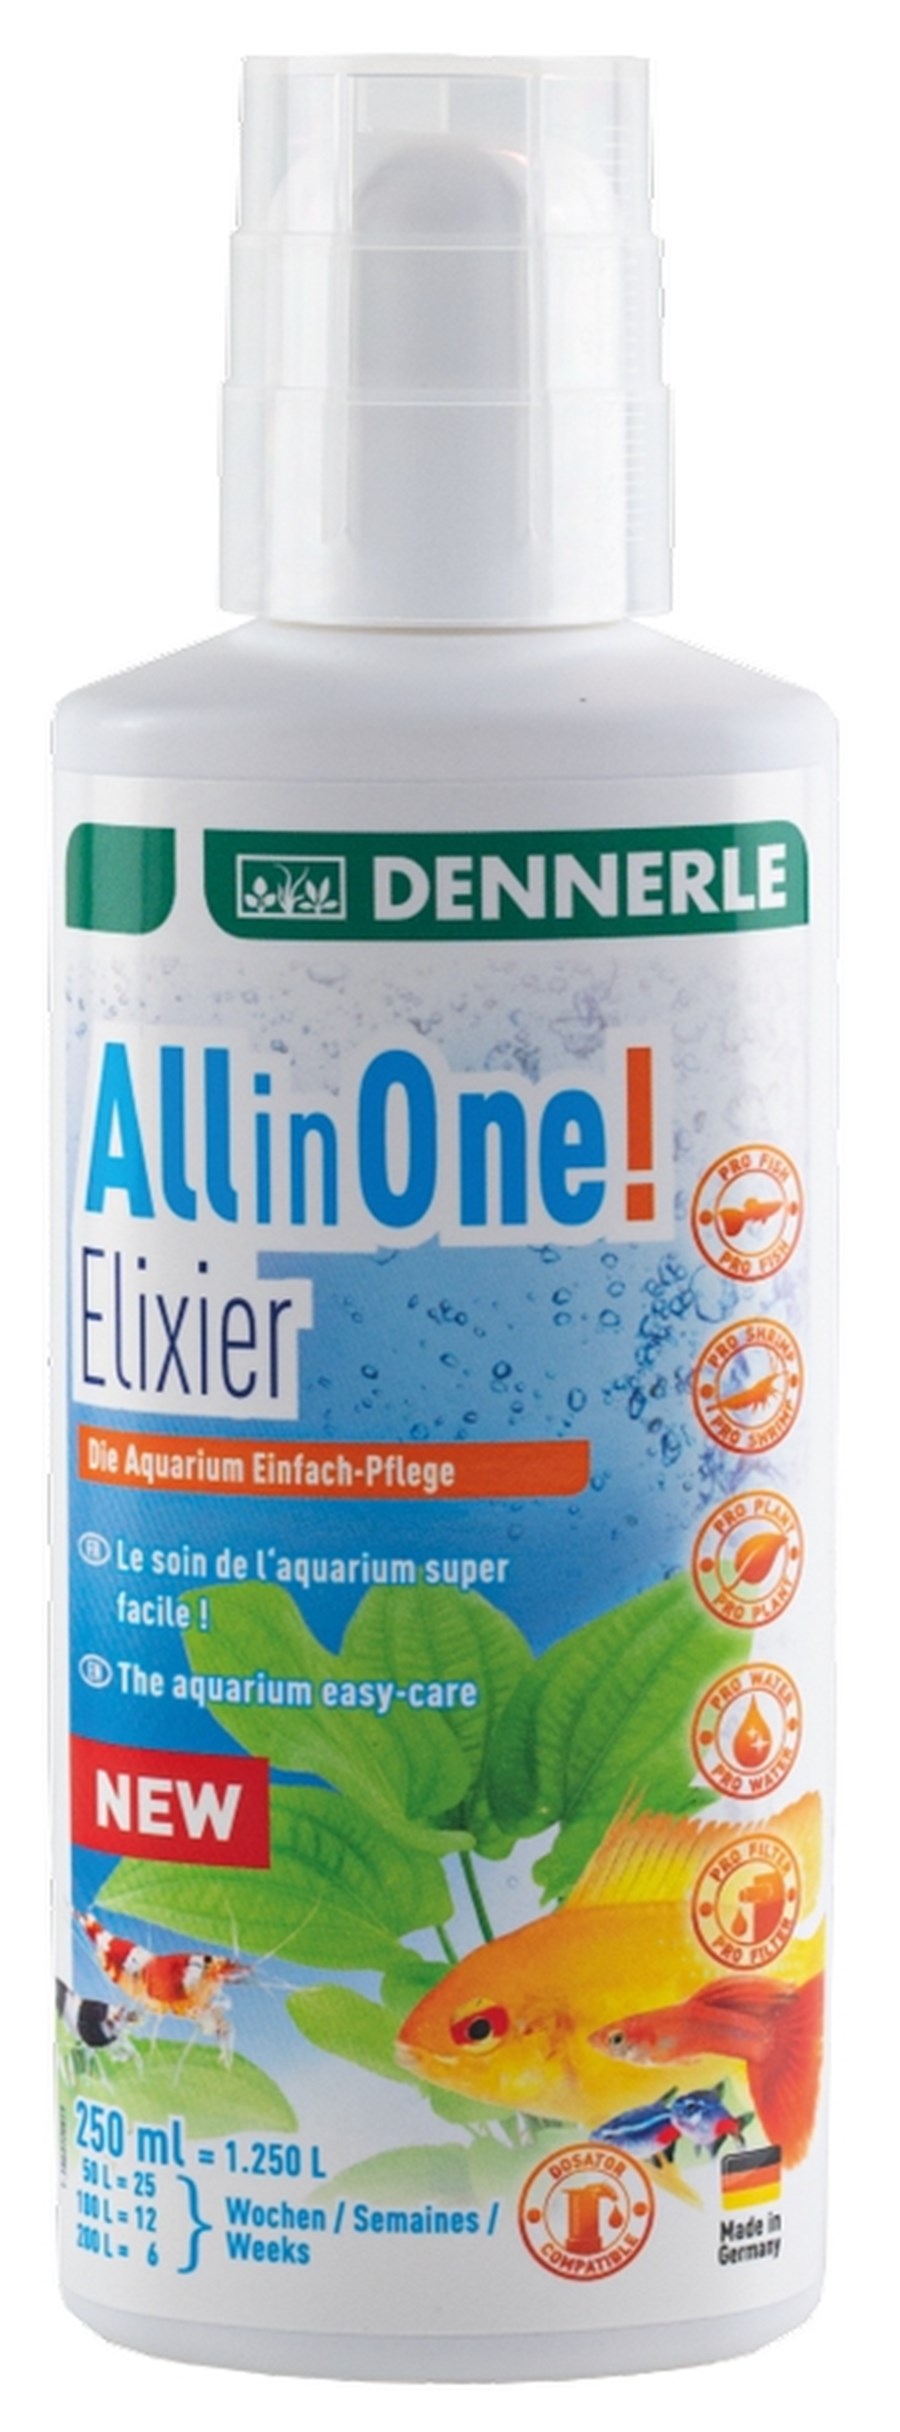 All in One! Elixier 250ml